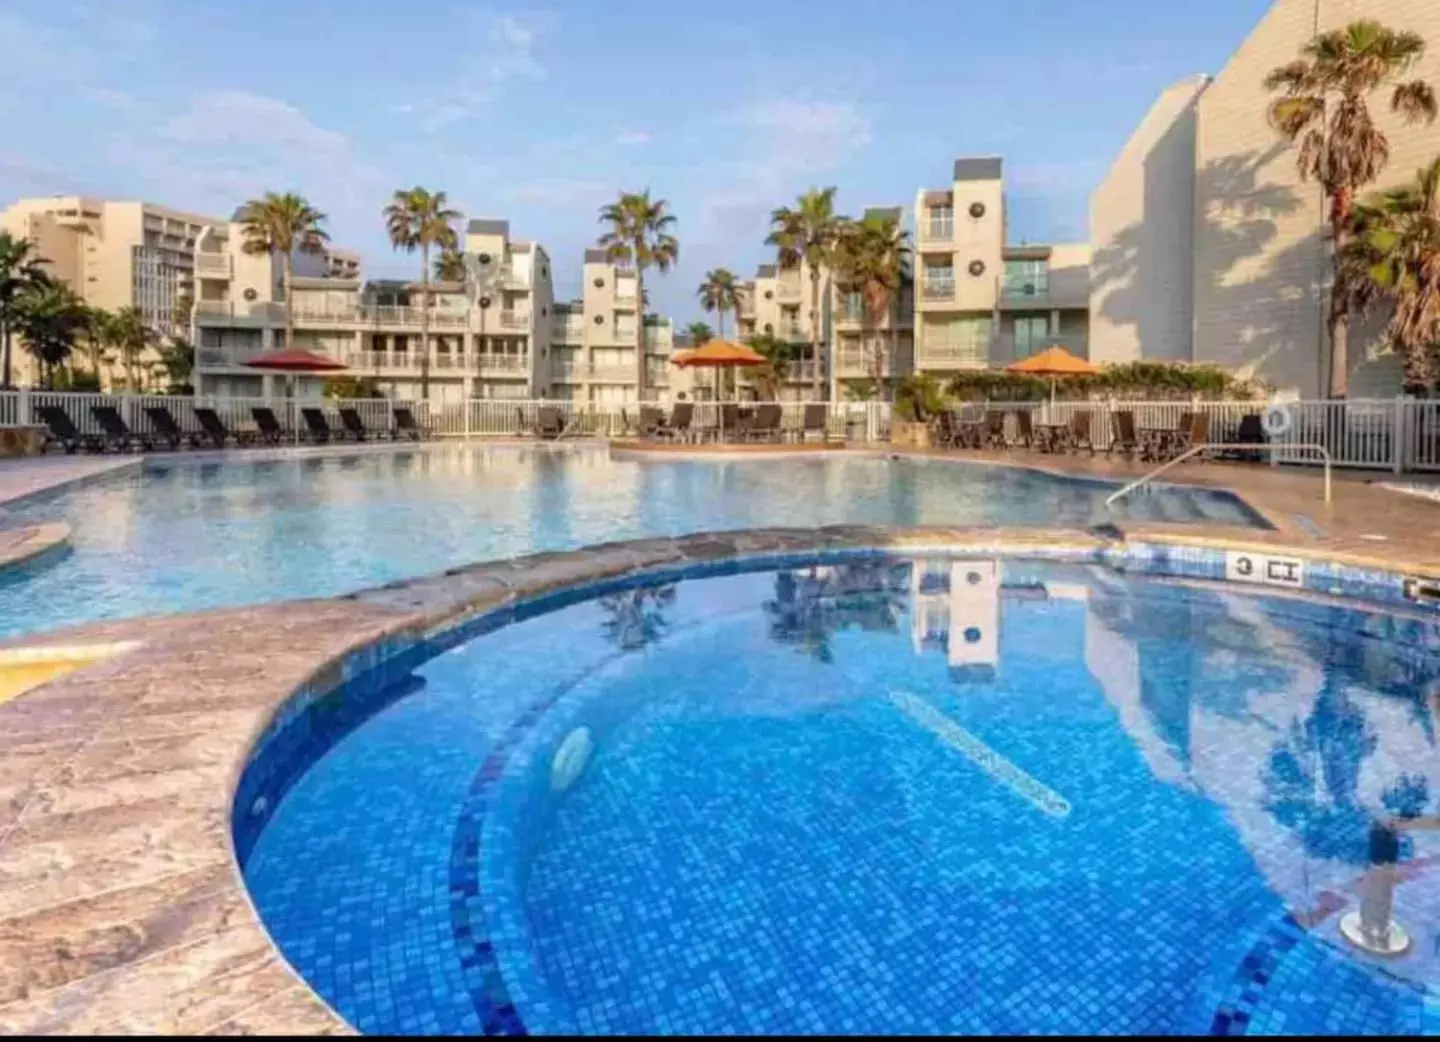 Hot Tub, Swimming Pool in Bahia Mar Solare Tower 6th floor Bayview Condo 2bd 2ba with Pools and Hot tubs